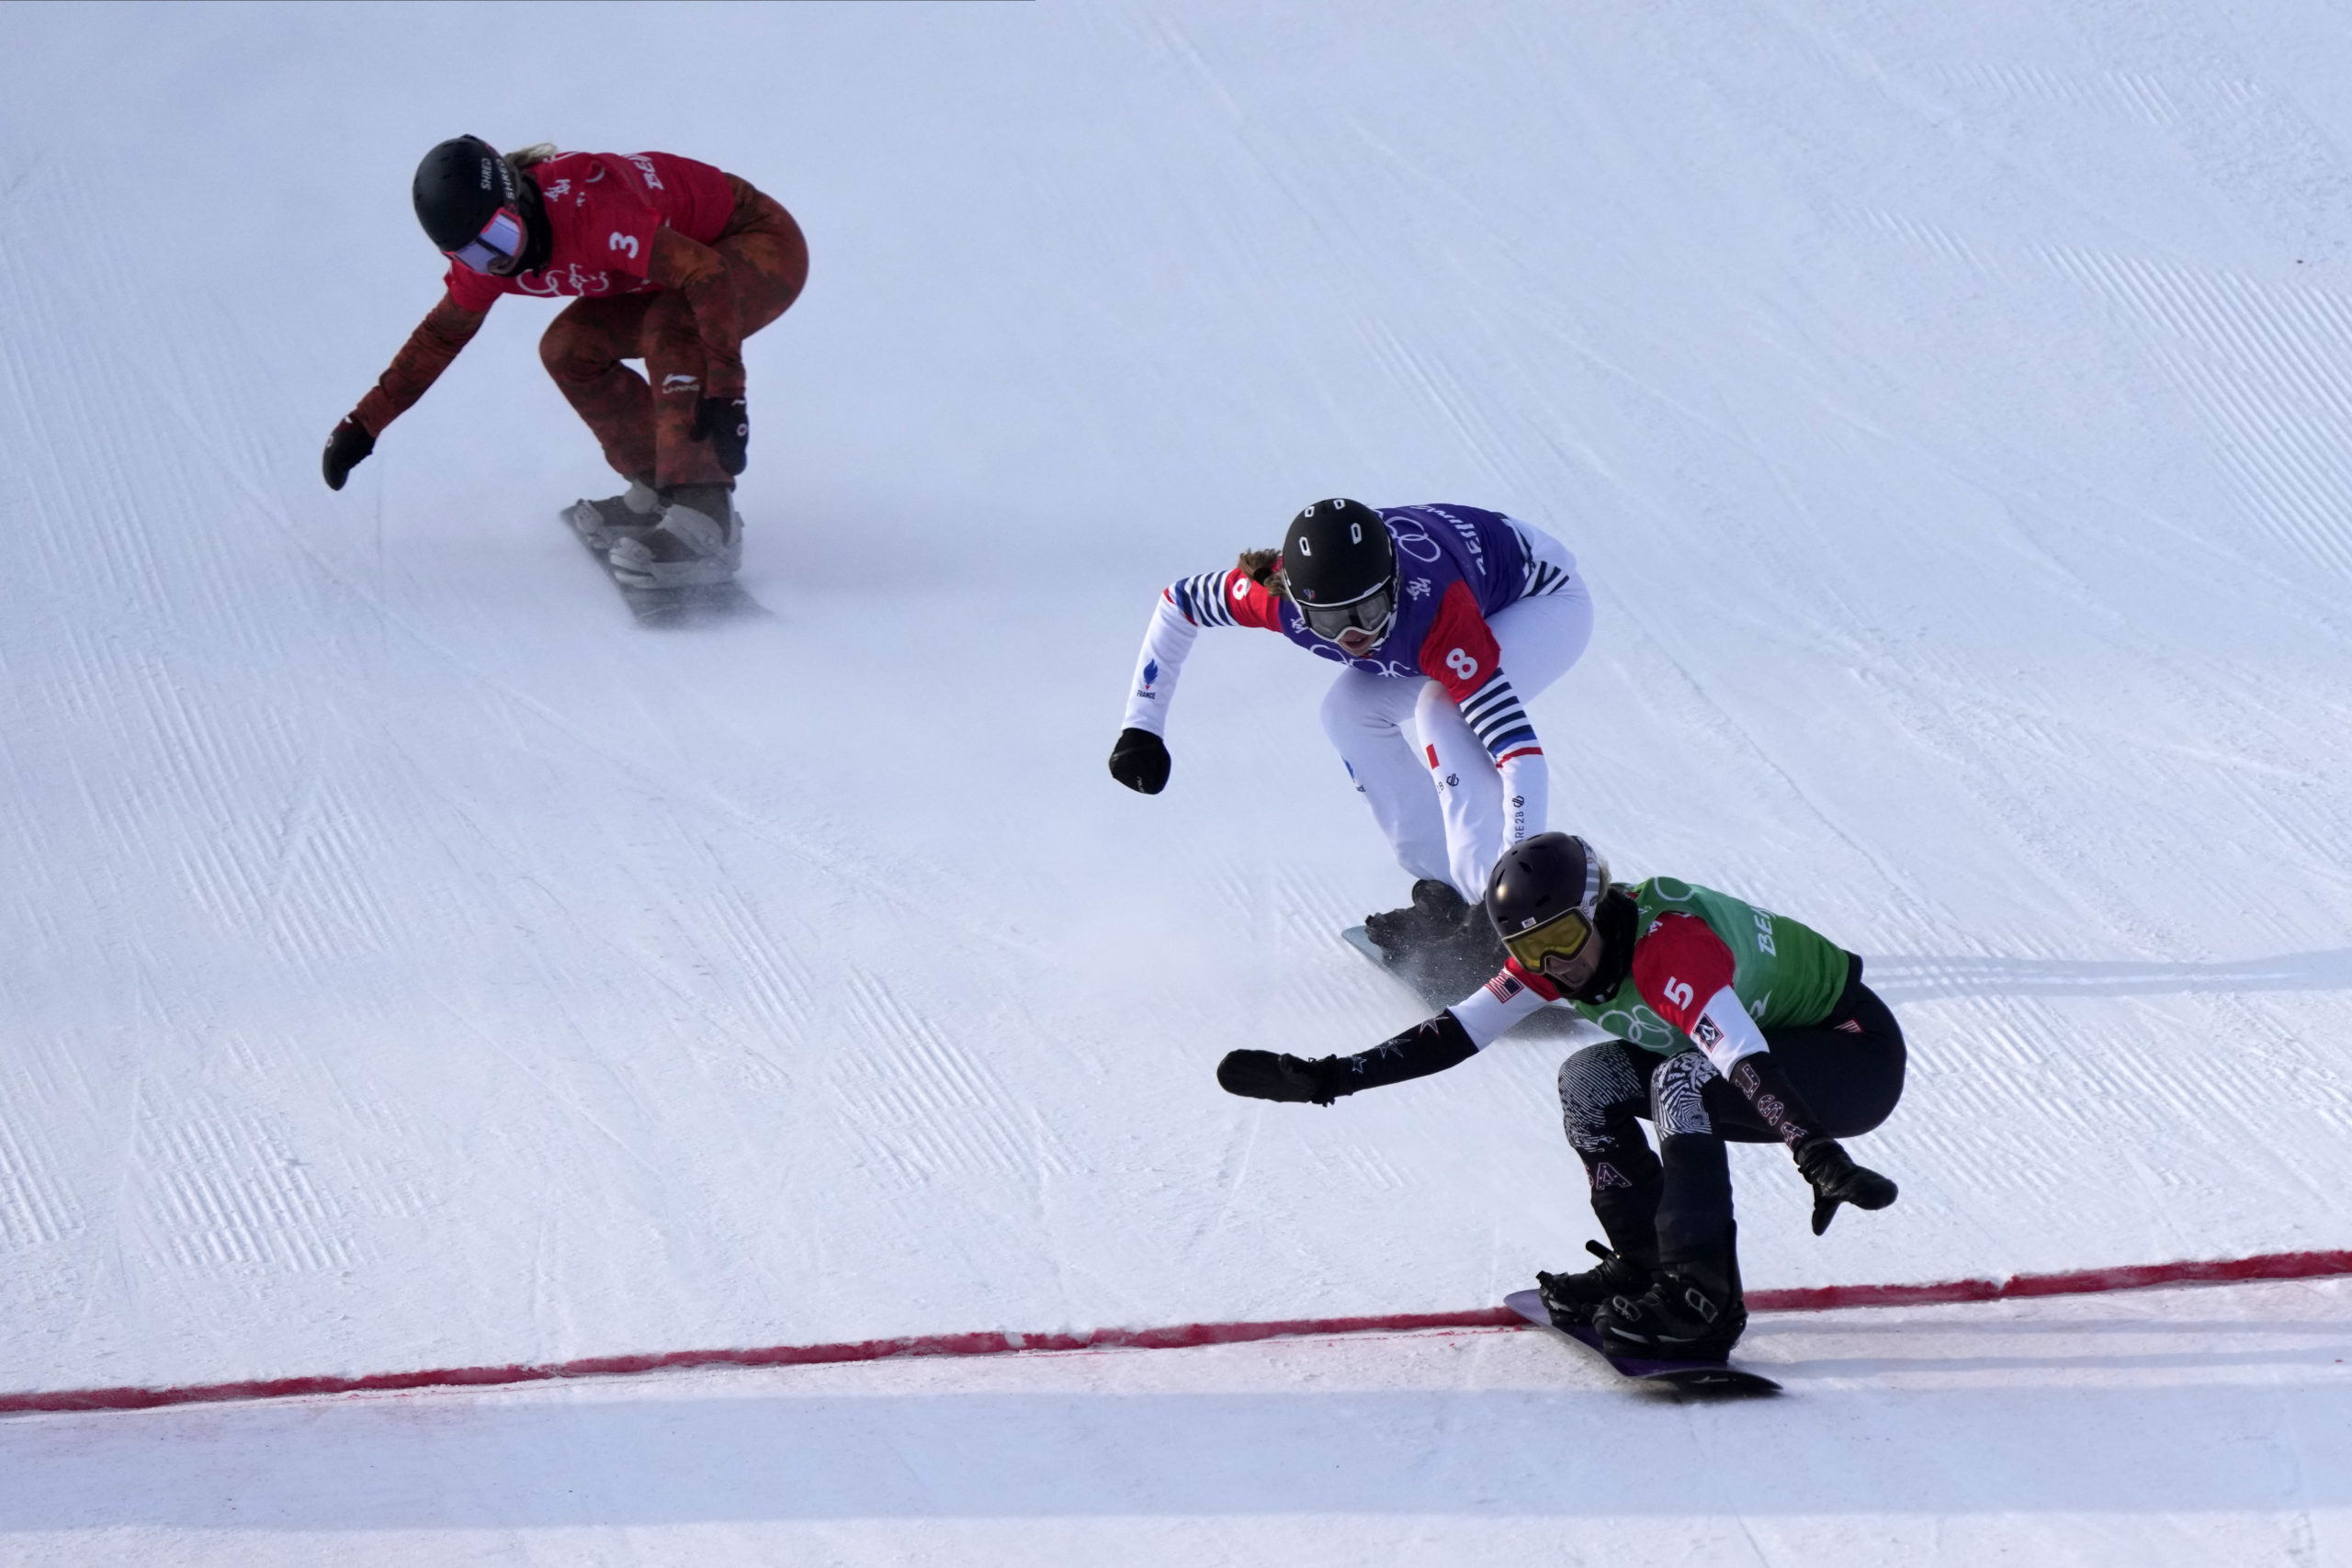 The United States' Lindsey Jacobellis (5) crosses the finish line to win the gold medal in snowboard cross Wednesday in Zhangjiakou, China, during the 2022 Winter Olympics.